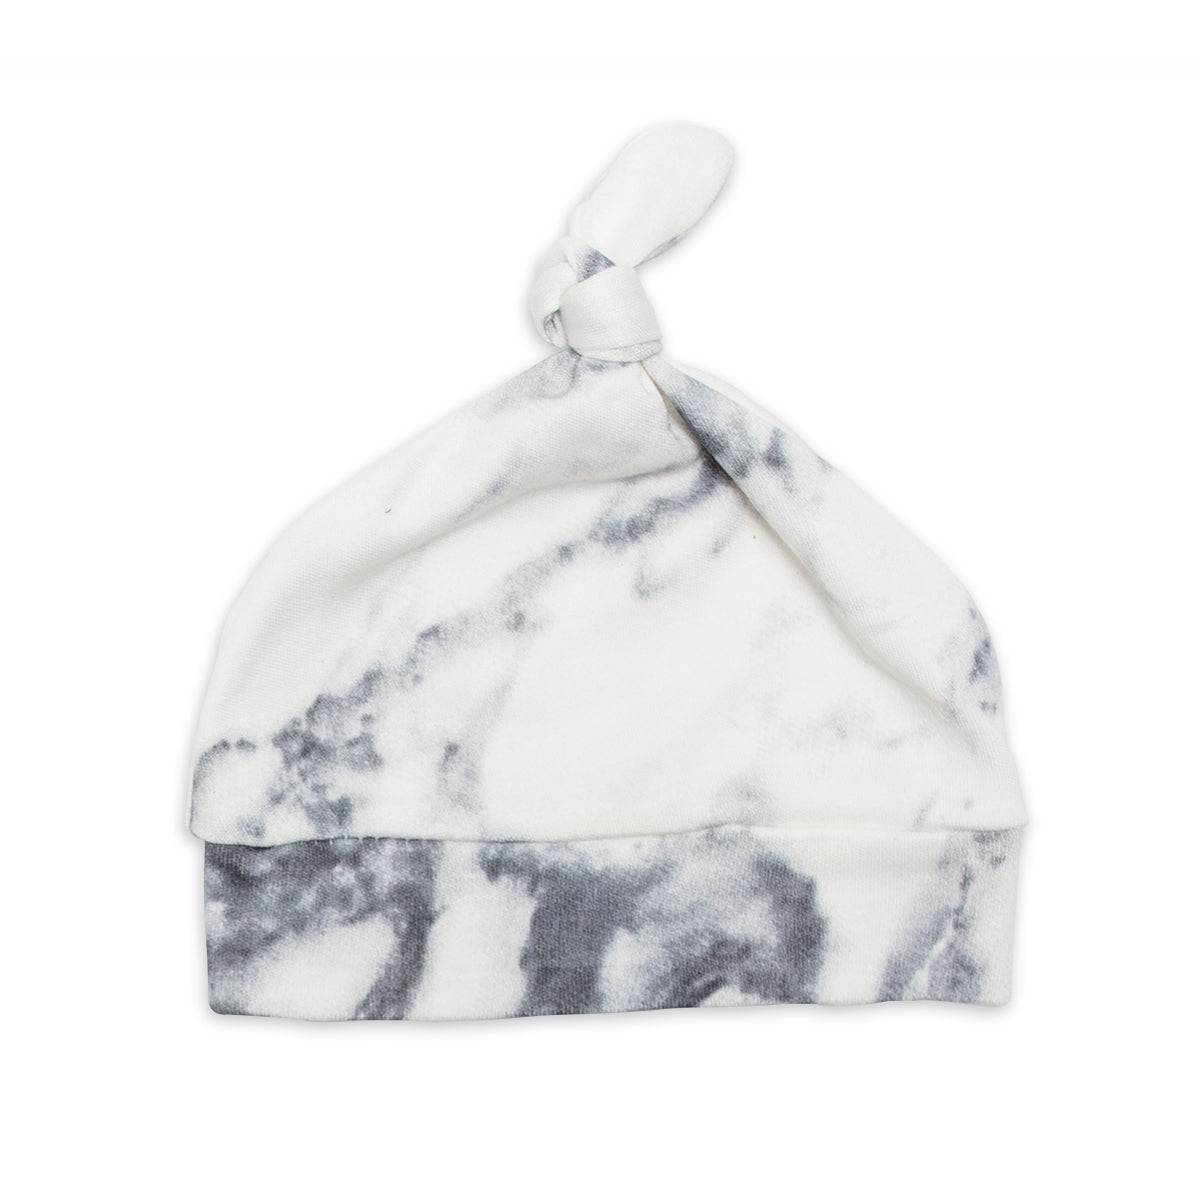 marble hello world hat on a white background